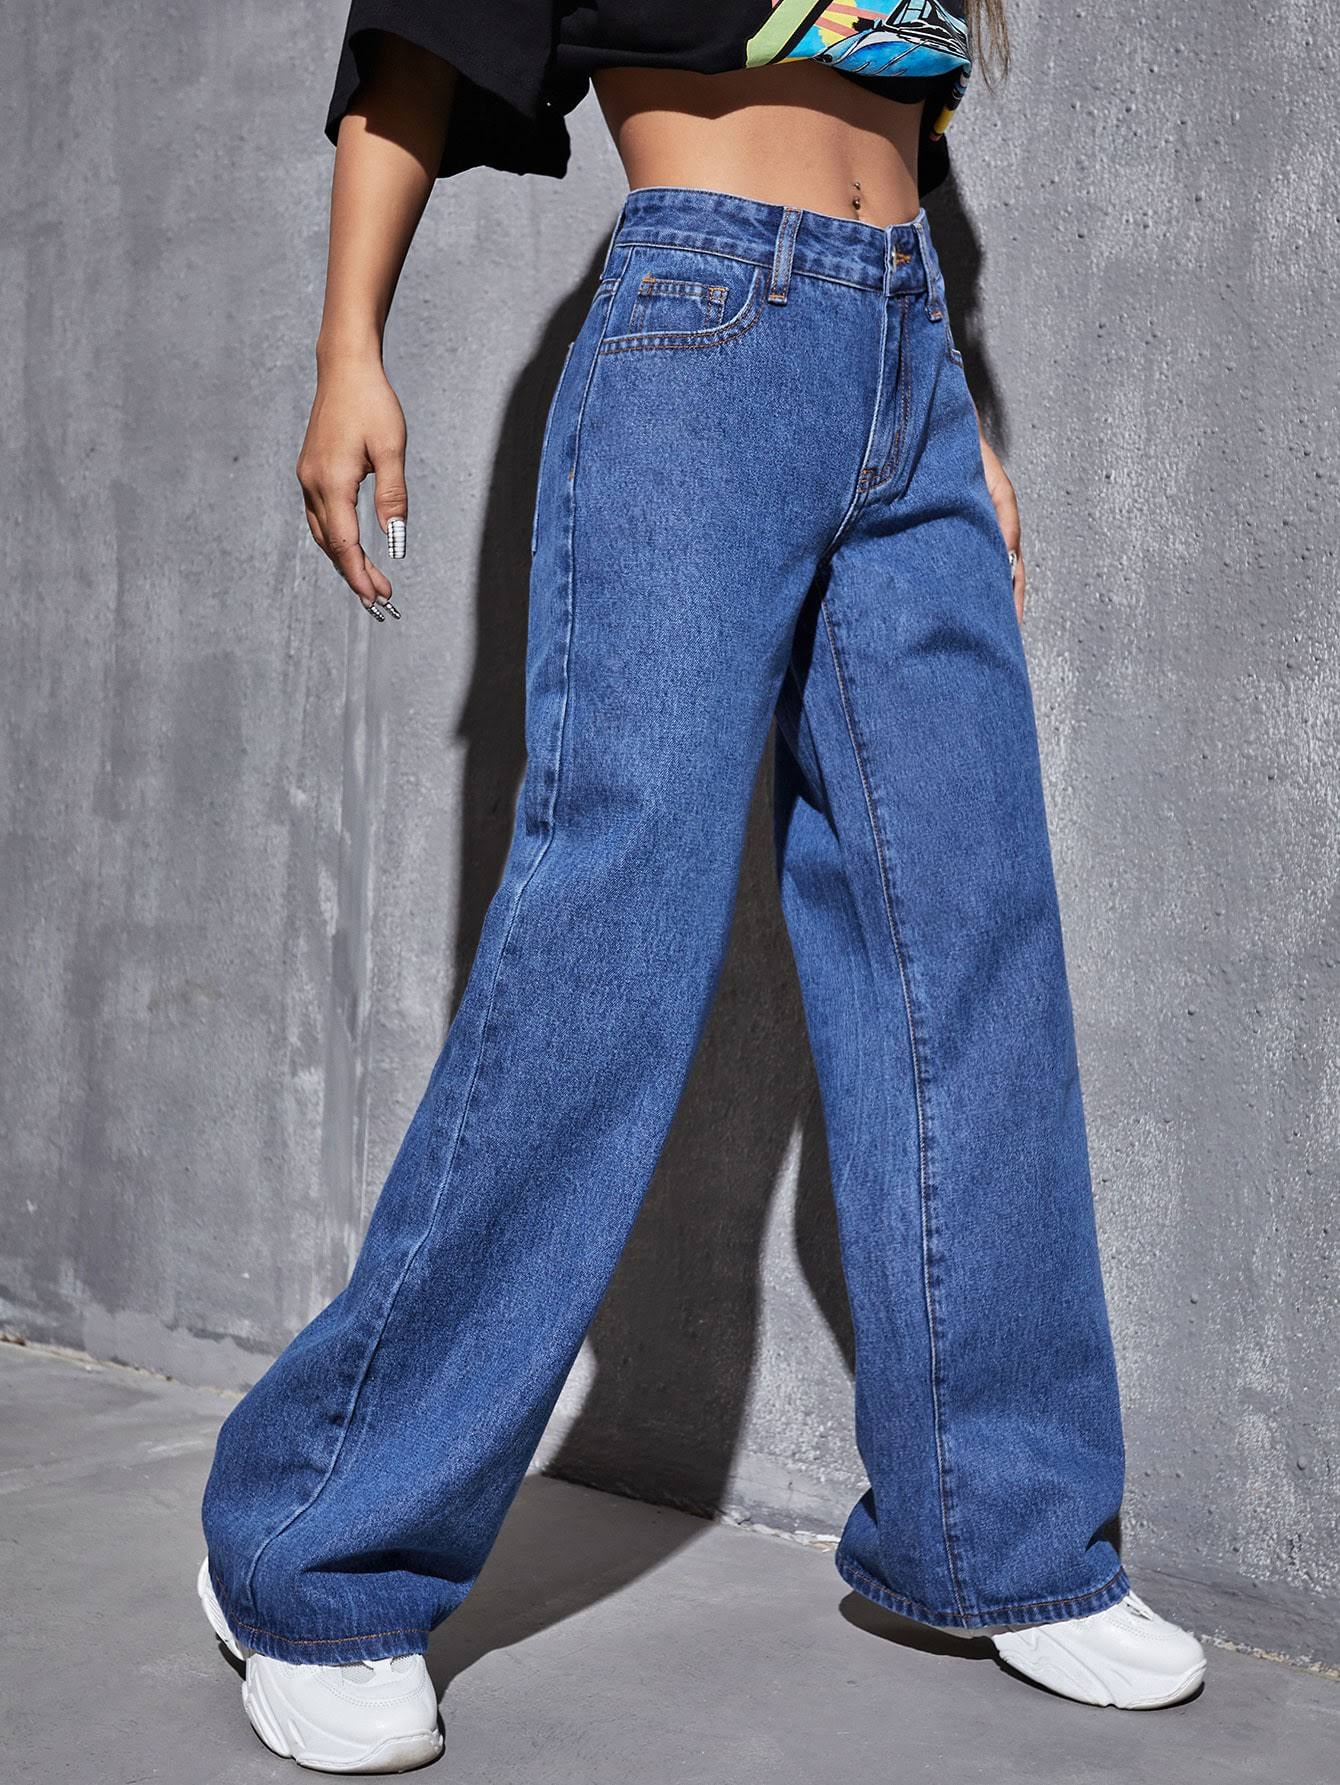 Blue High Waist Jeans For Women & Girl | Loose Baggy Jeans